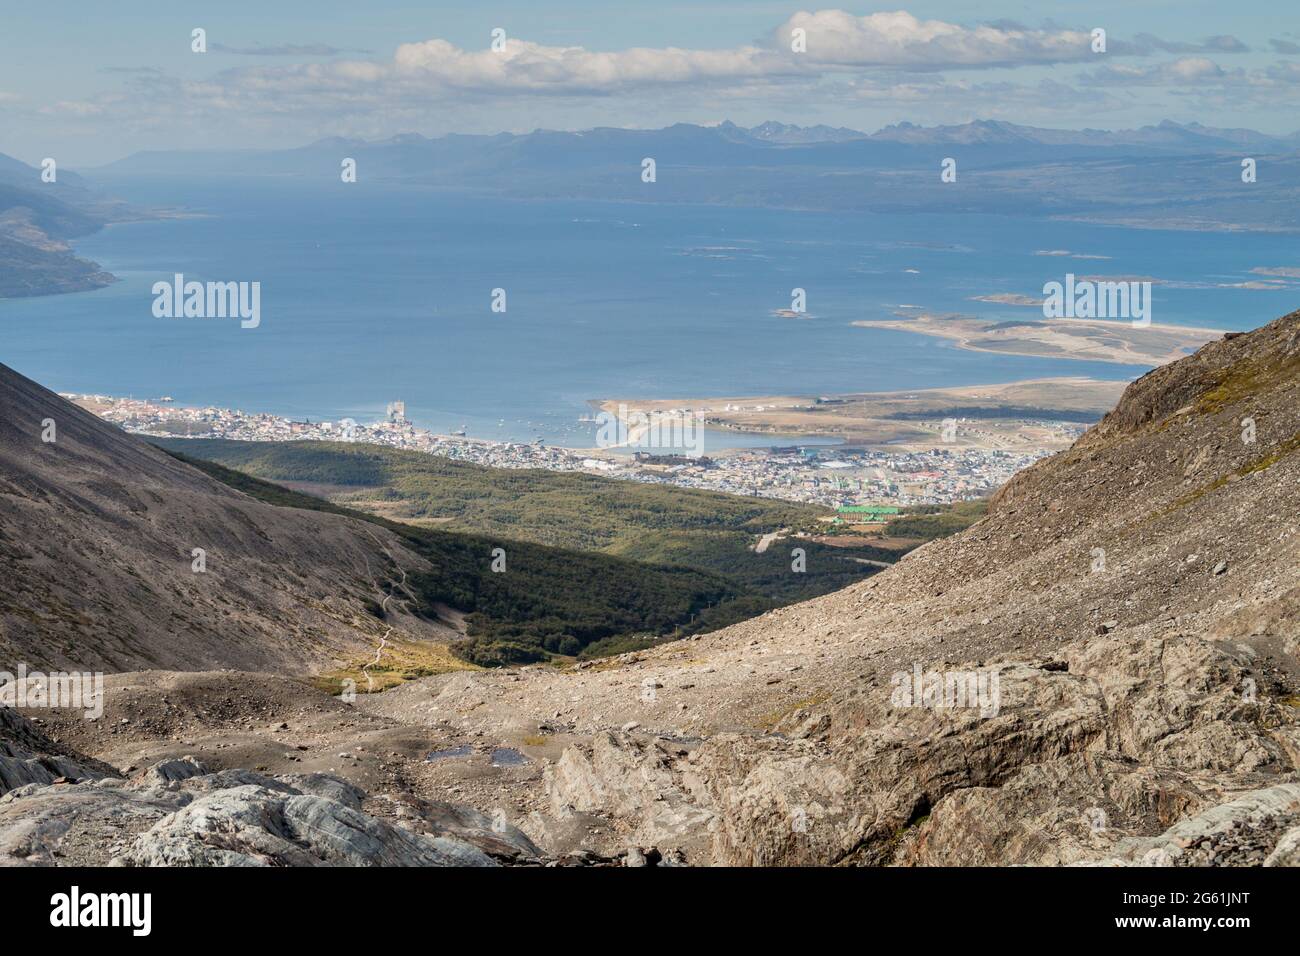 View of Beagle channel and mountains near Ushuaia, Argentina Stock Photo